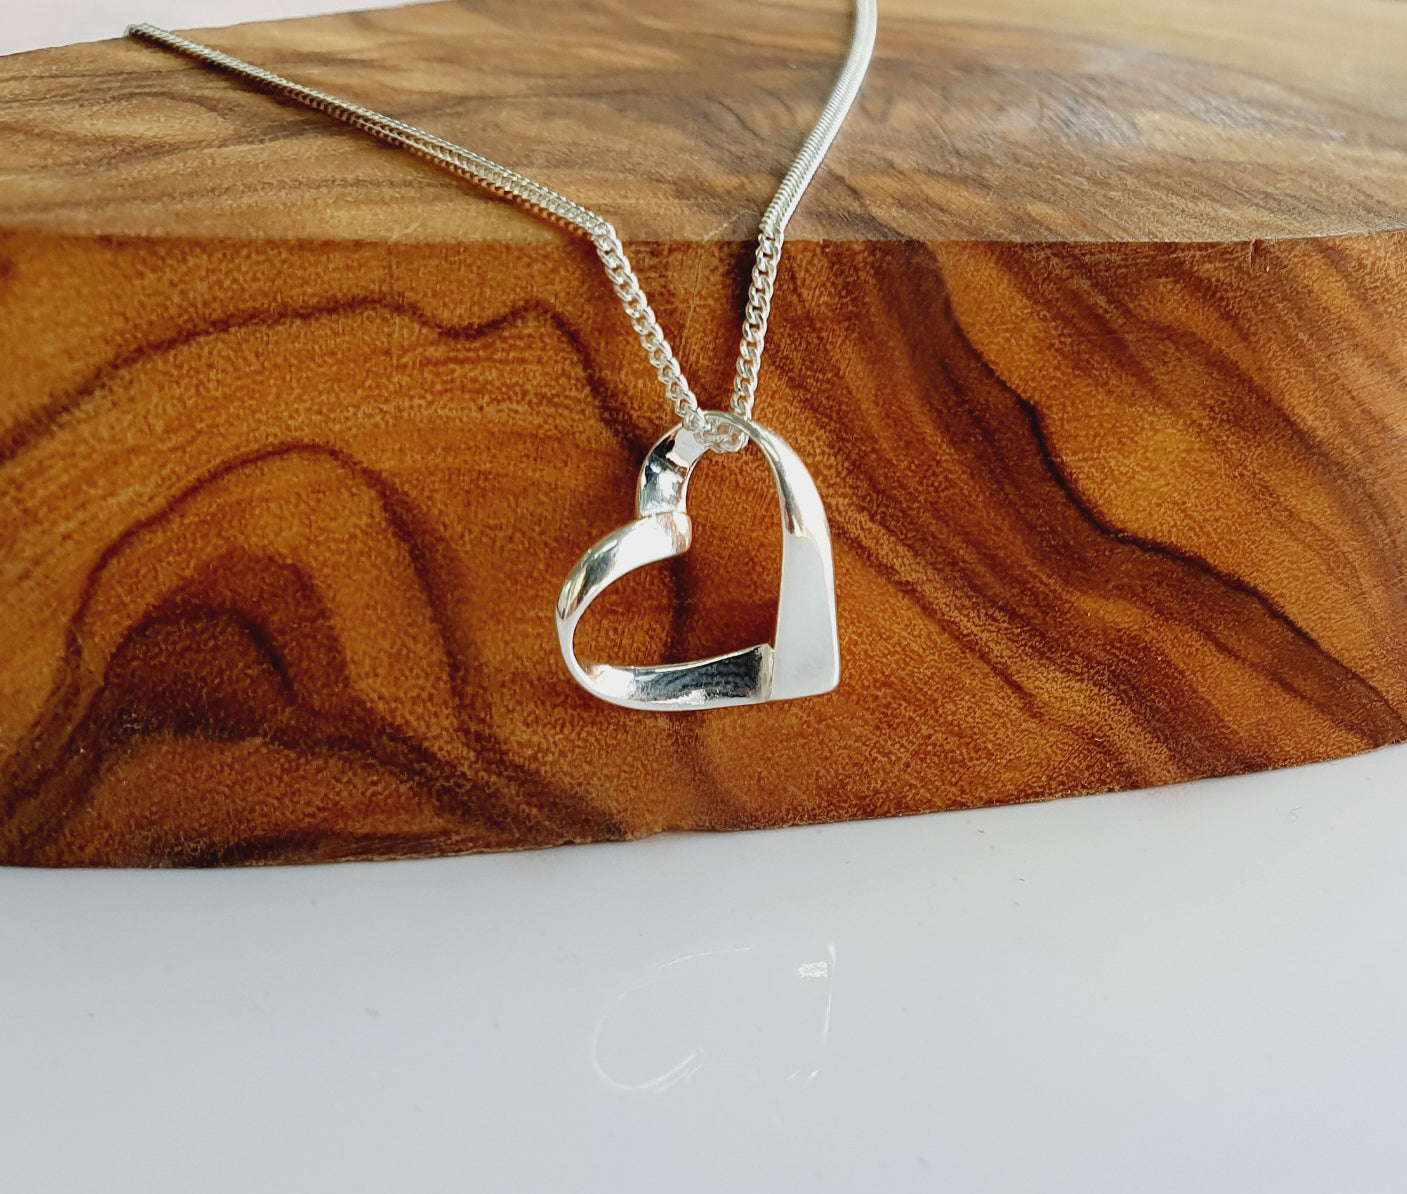 Mum Ribbon Heart Necklace in Sterling Silver 925, Personalised Gift